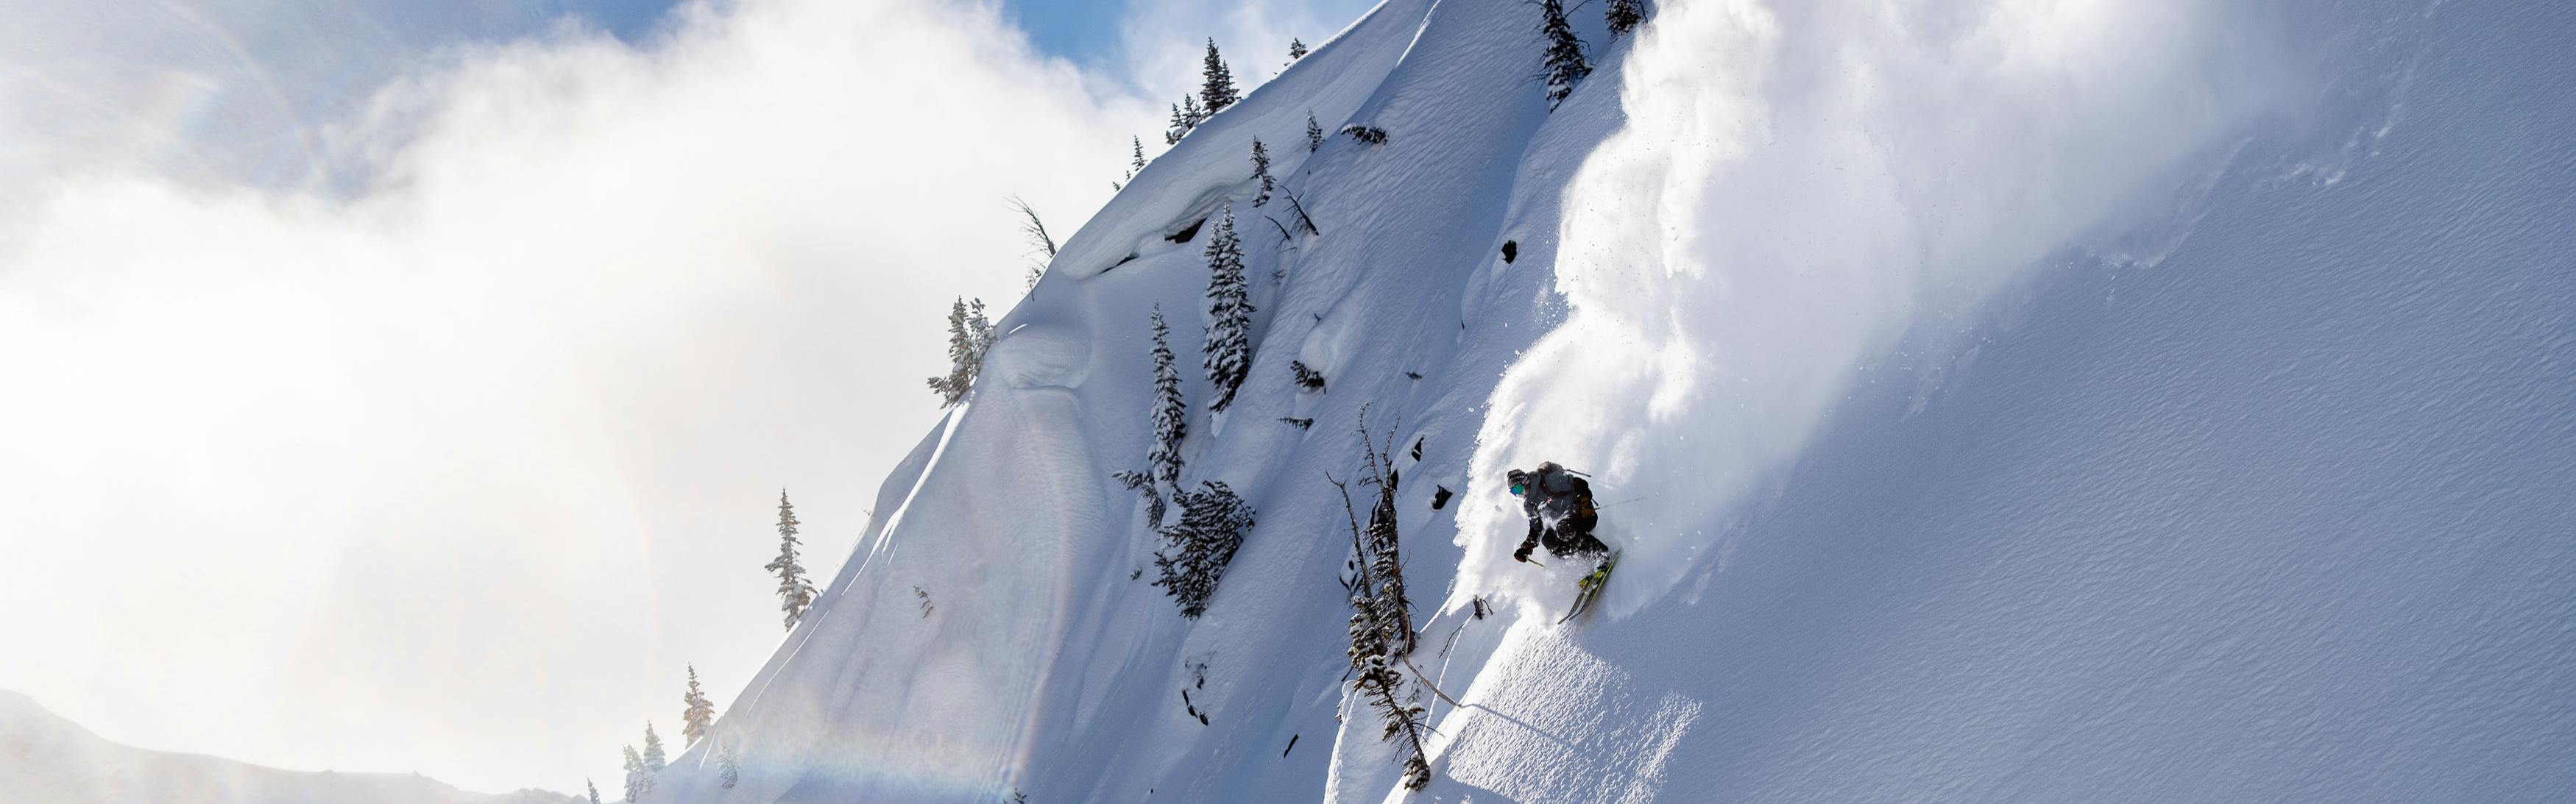 Parker White shoots down a mountain, sending a trail of powder off behind him.